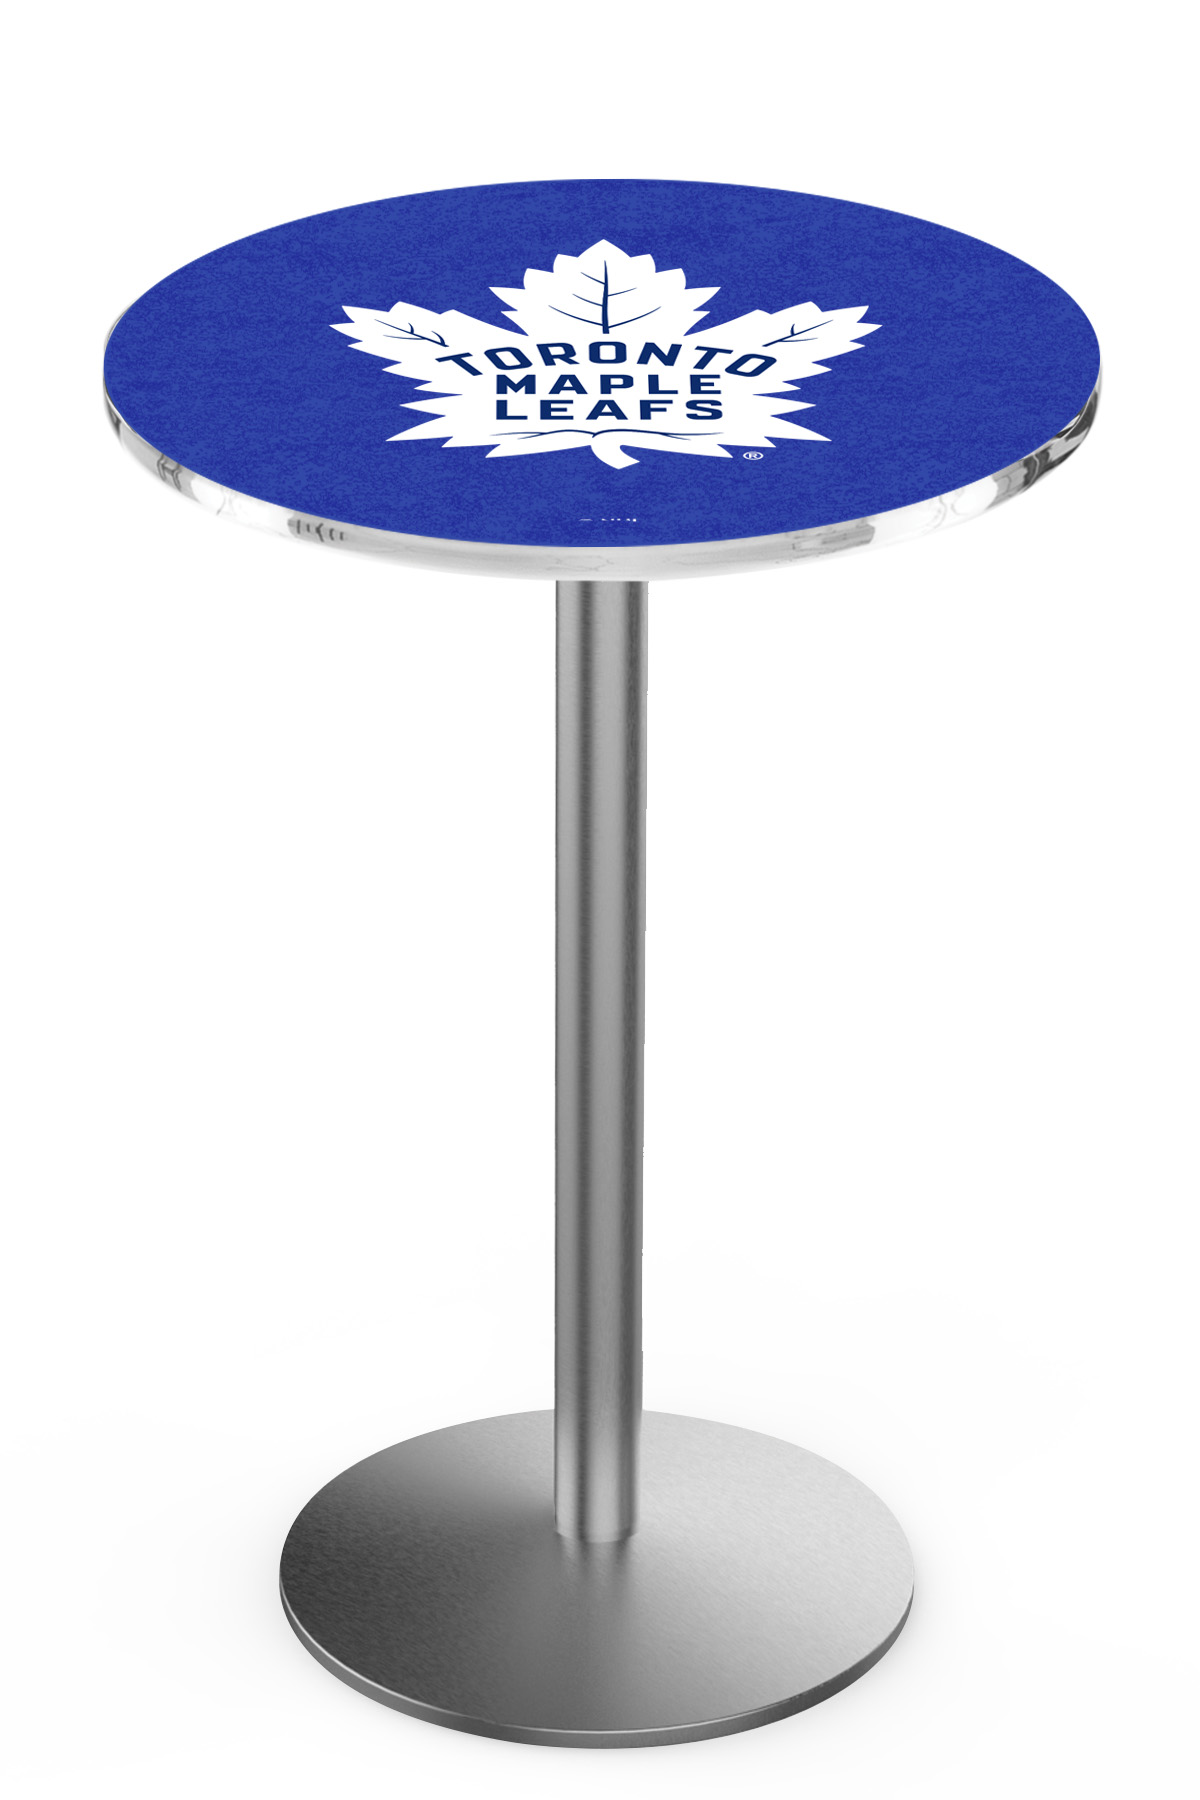 L214 Toronto Maple Leafs 42" Tall - 36" Top Pub Table with Stainless Finish -  Holland Bar Stool, L214S4236TorMpl